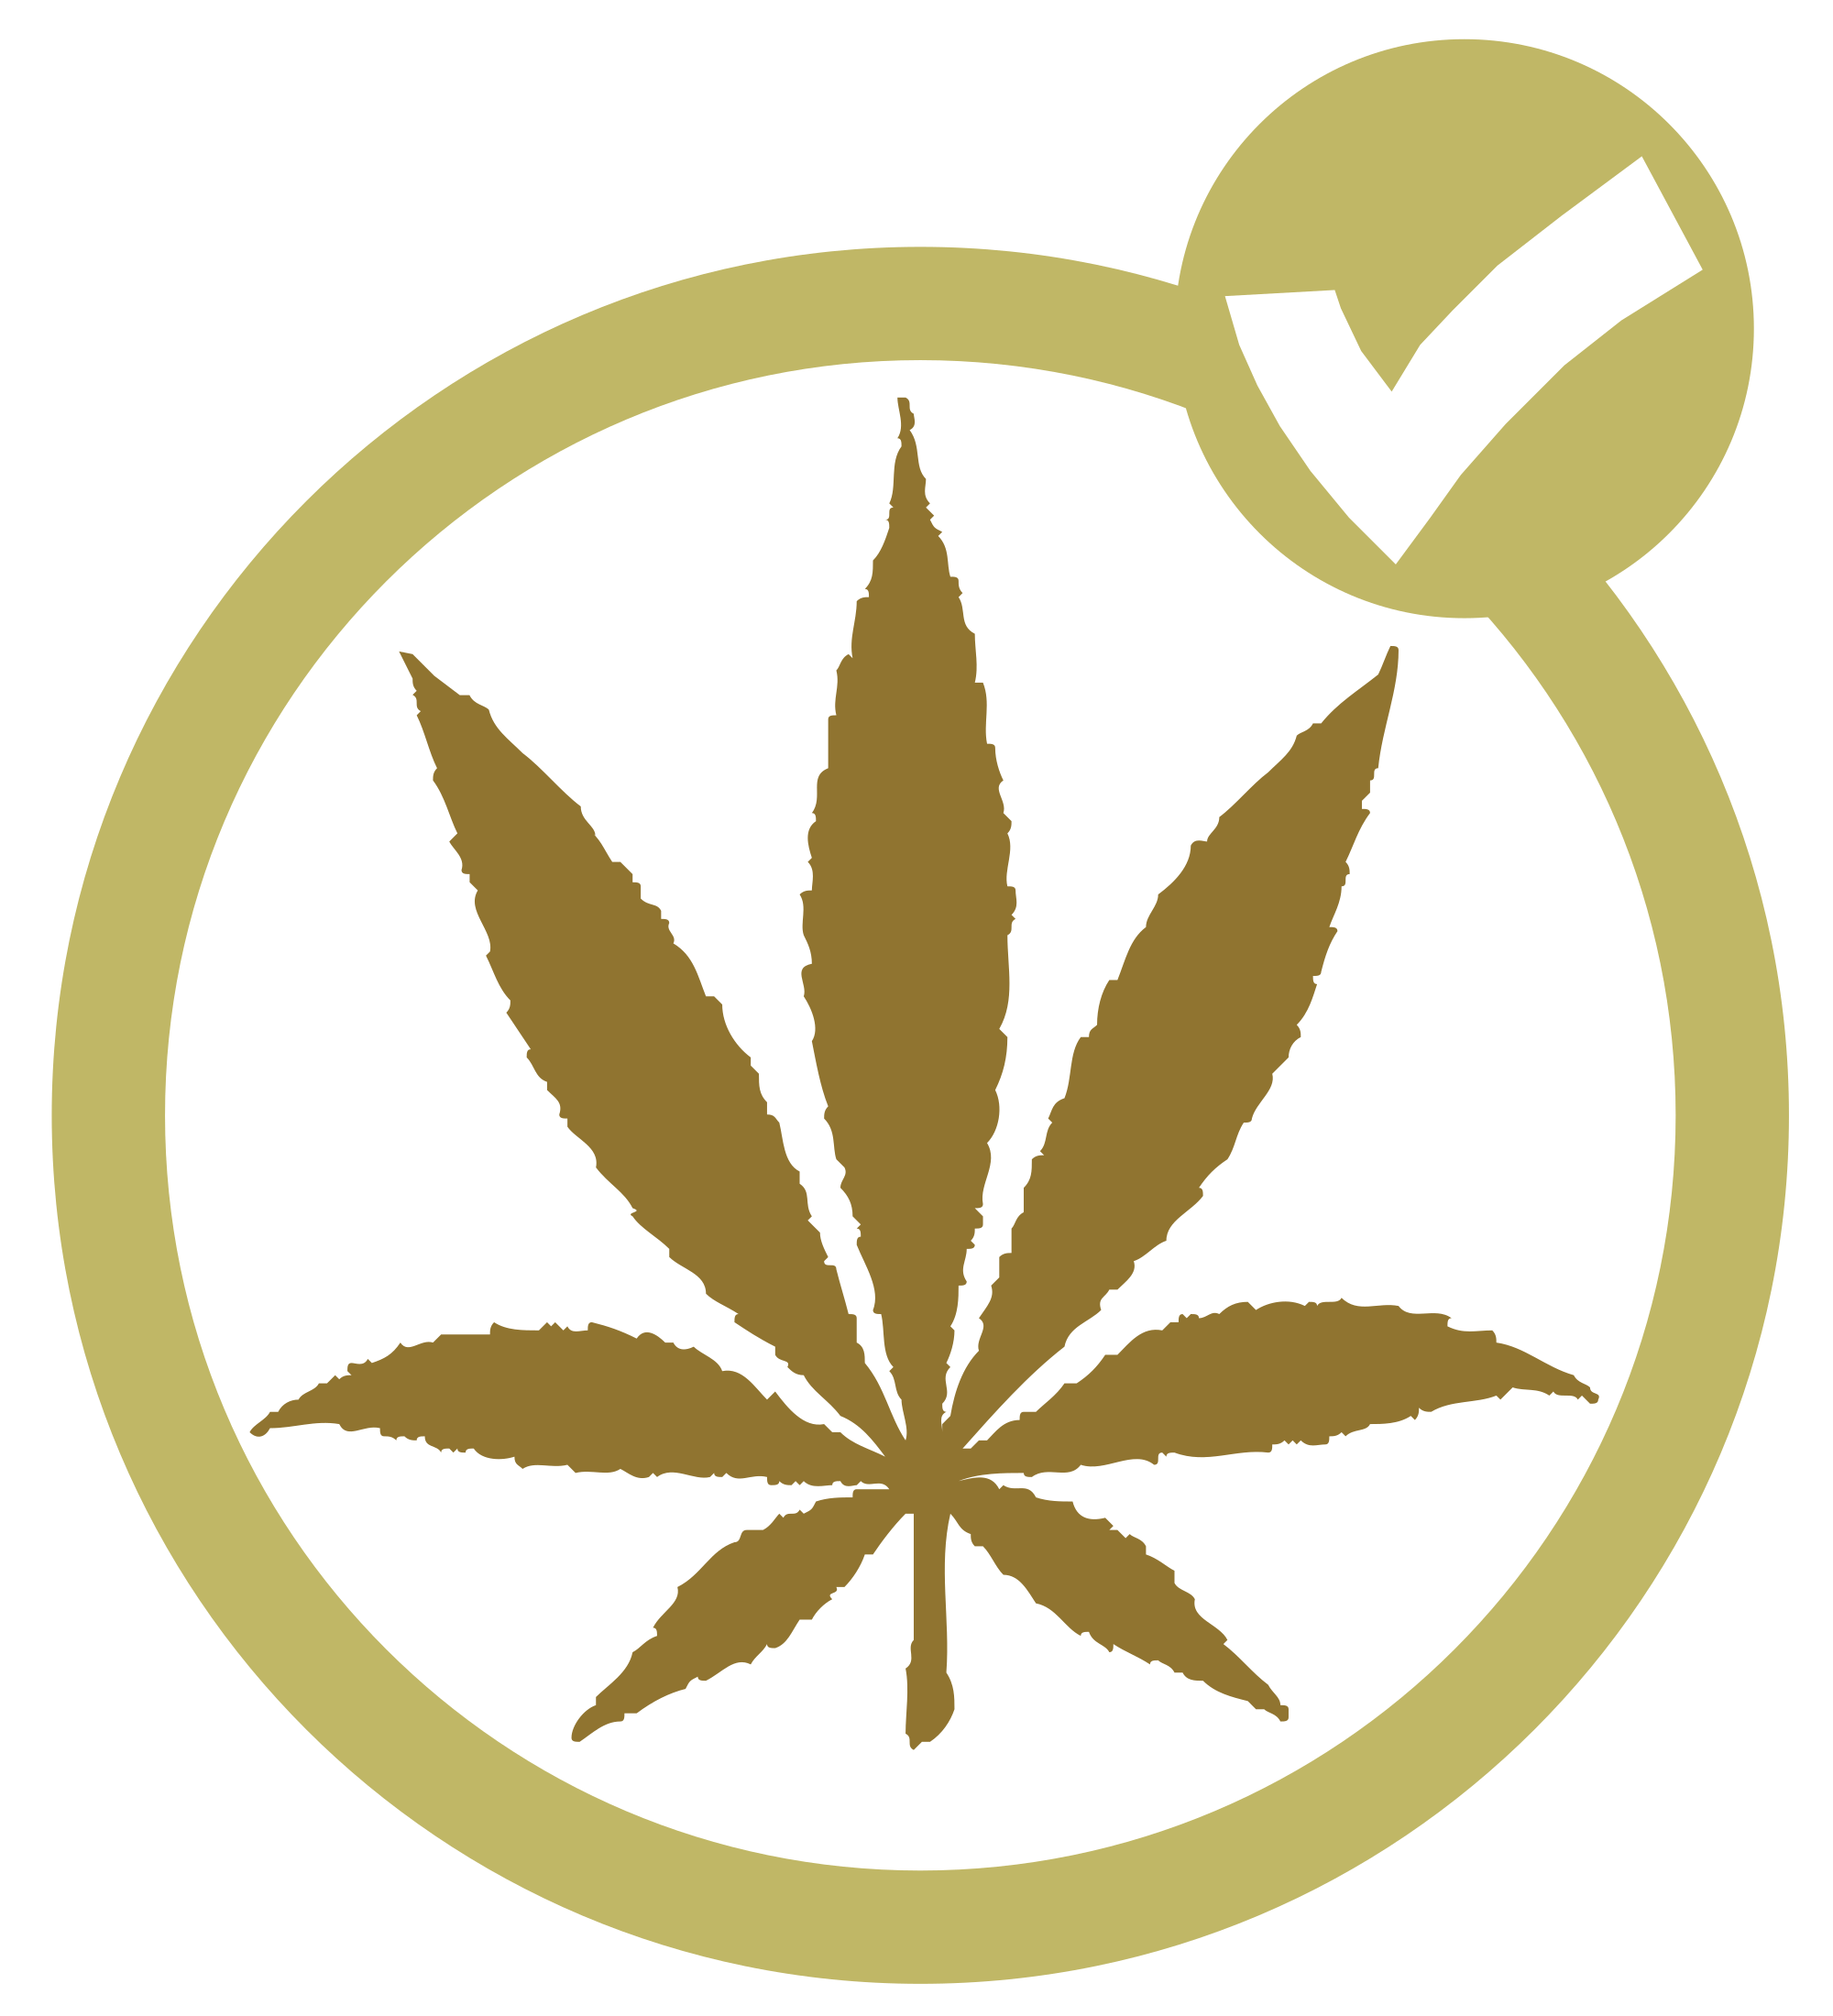 Ensuring Cannabis Workers’ Safety